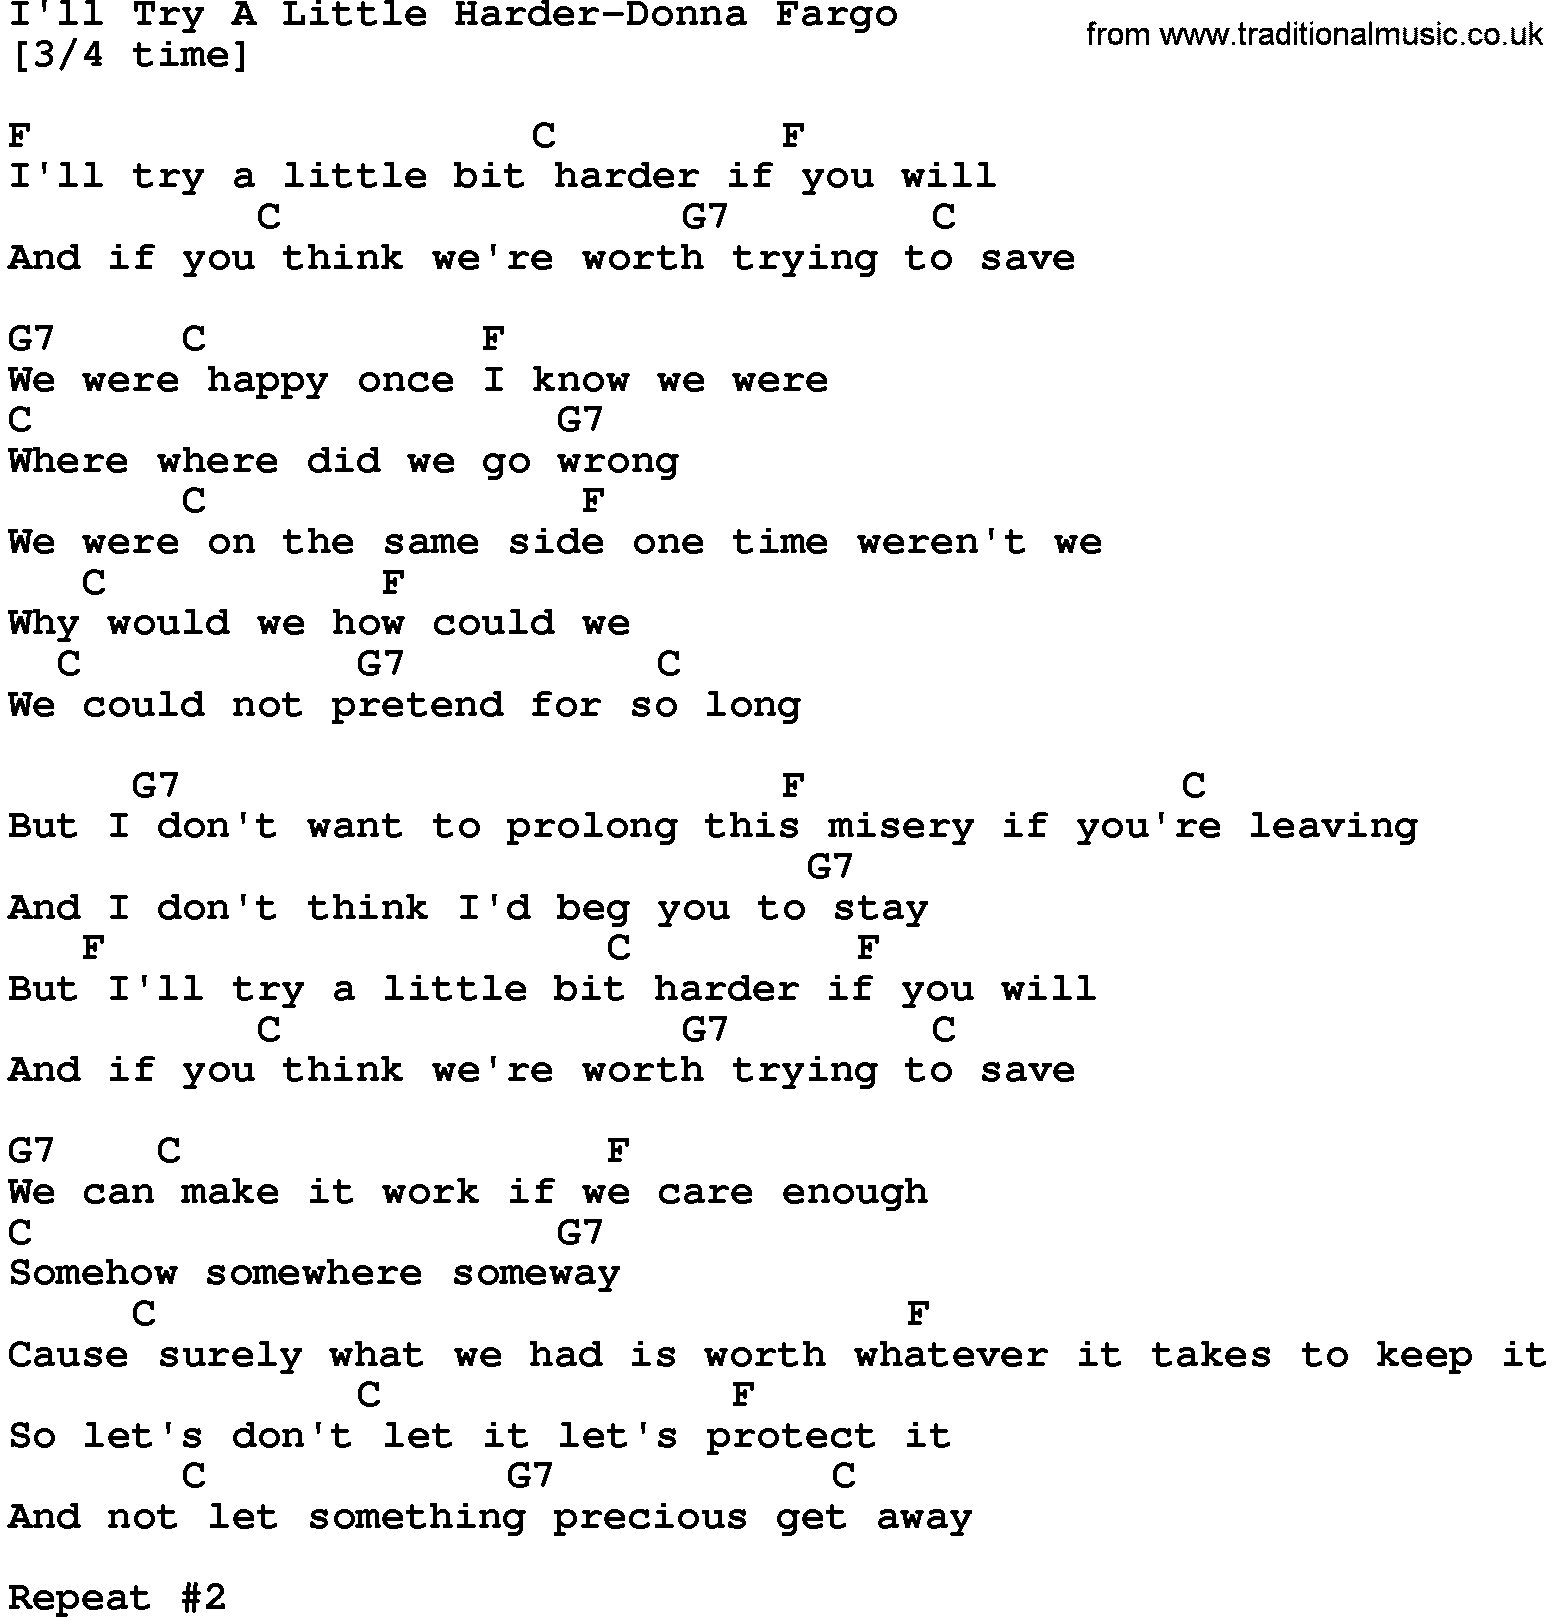 Country music song: I'll Try A Little Harder-Donna Fargo lyrics and chords